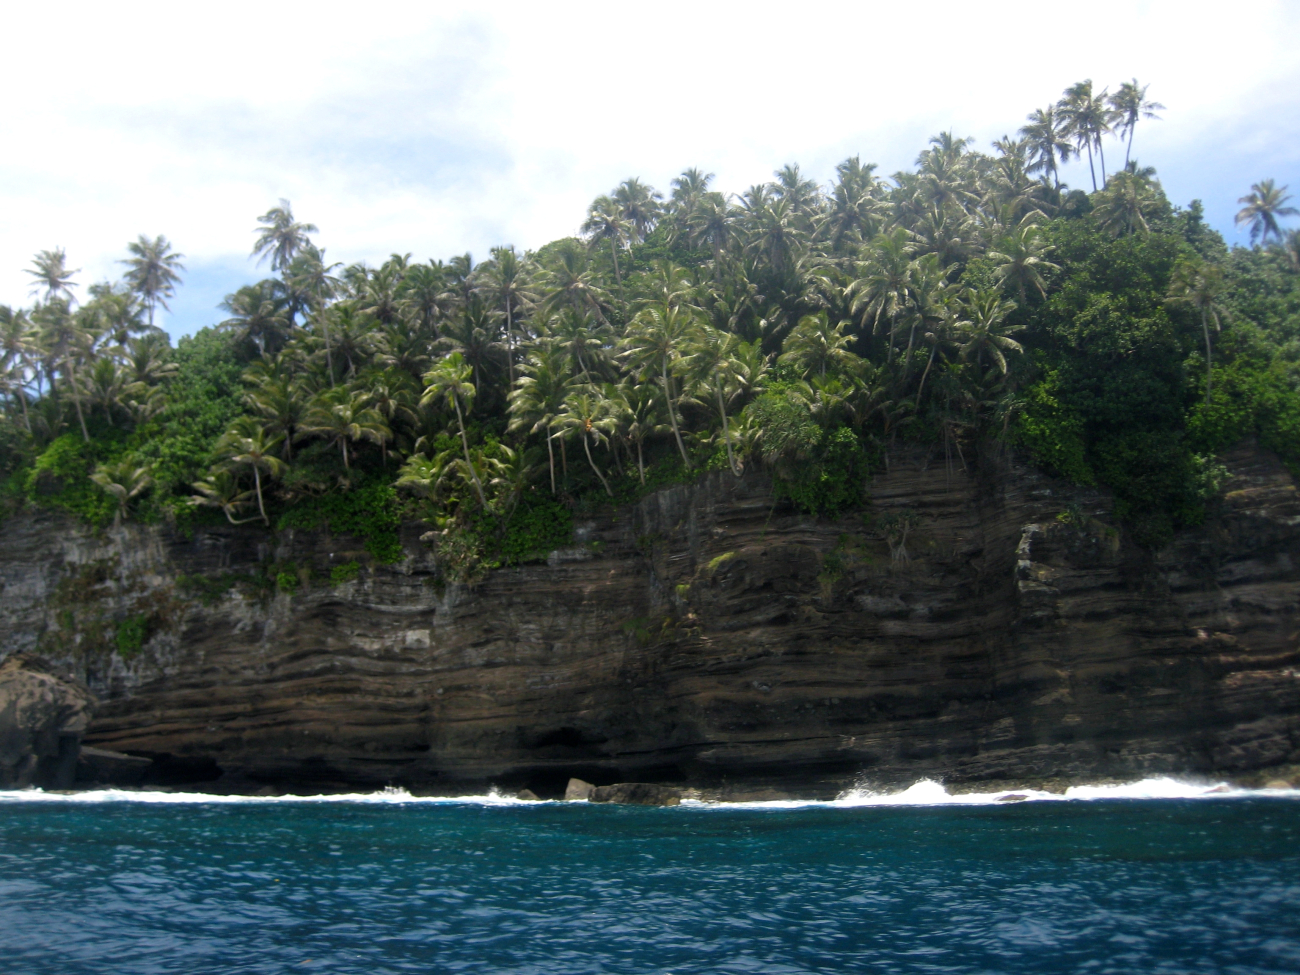 Cliffs and palm trees at Larsen's Bay